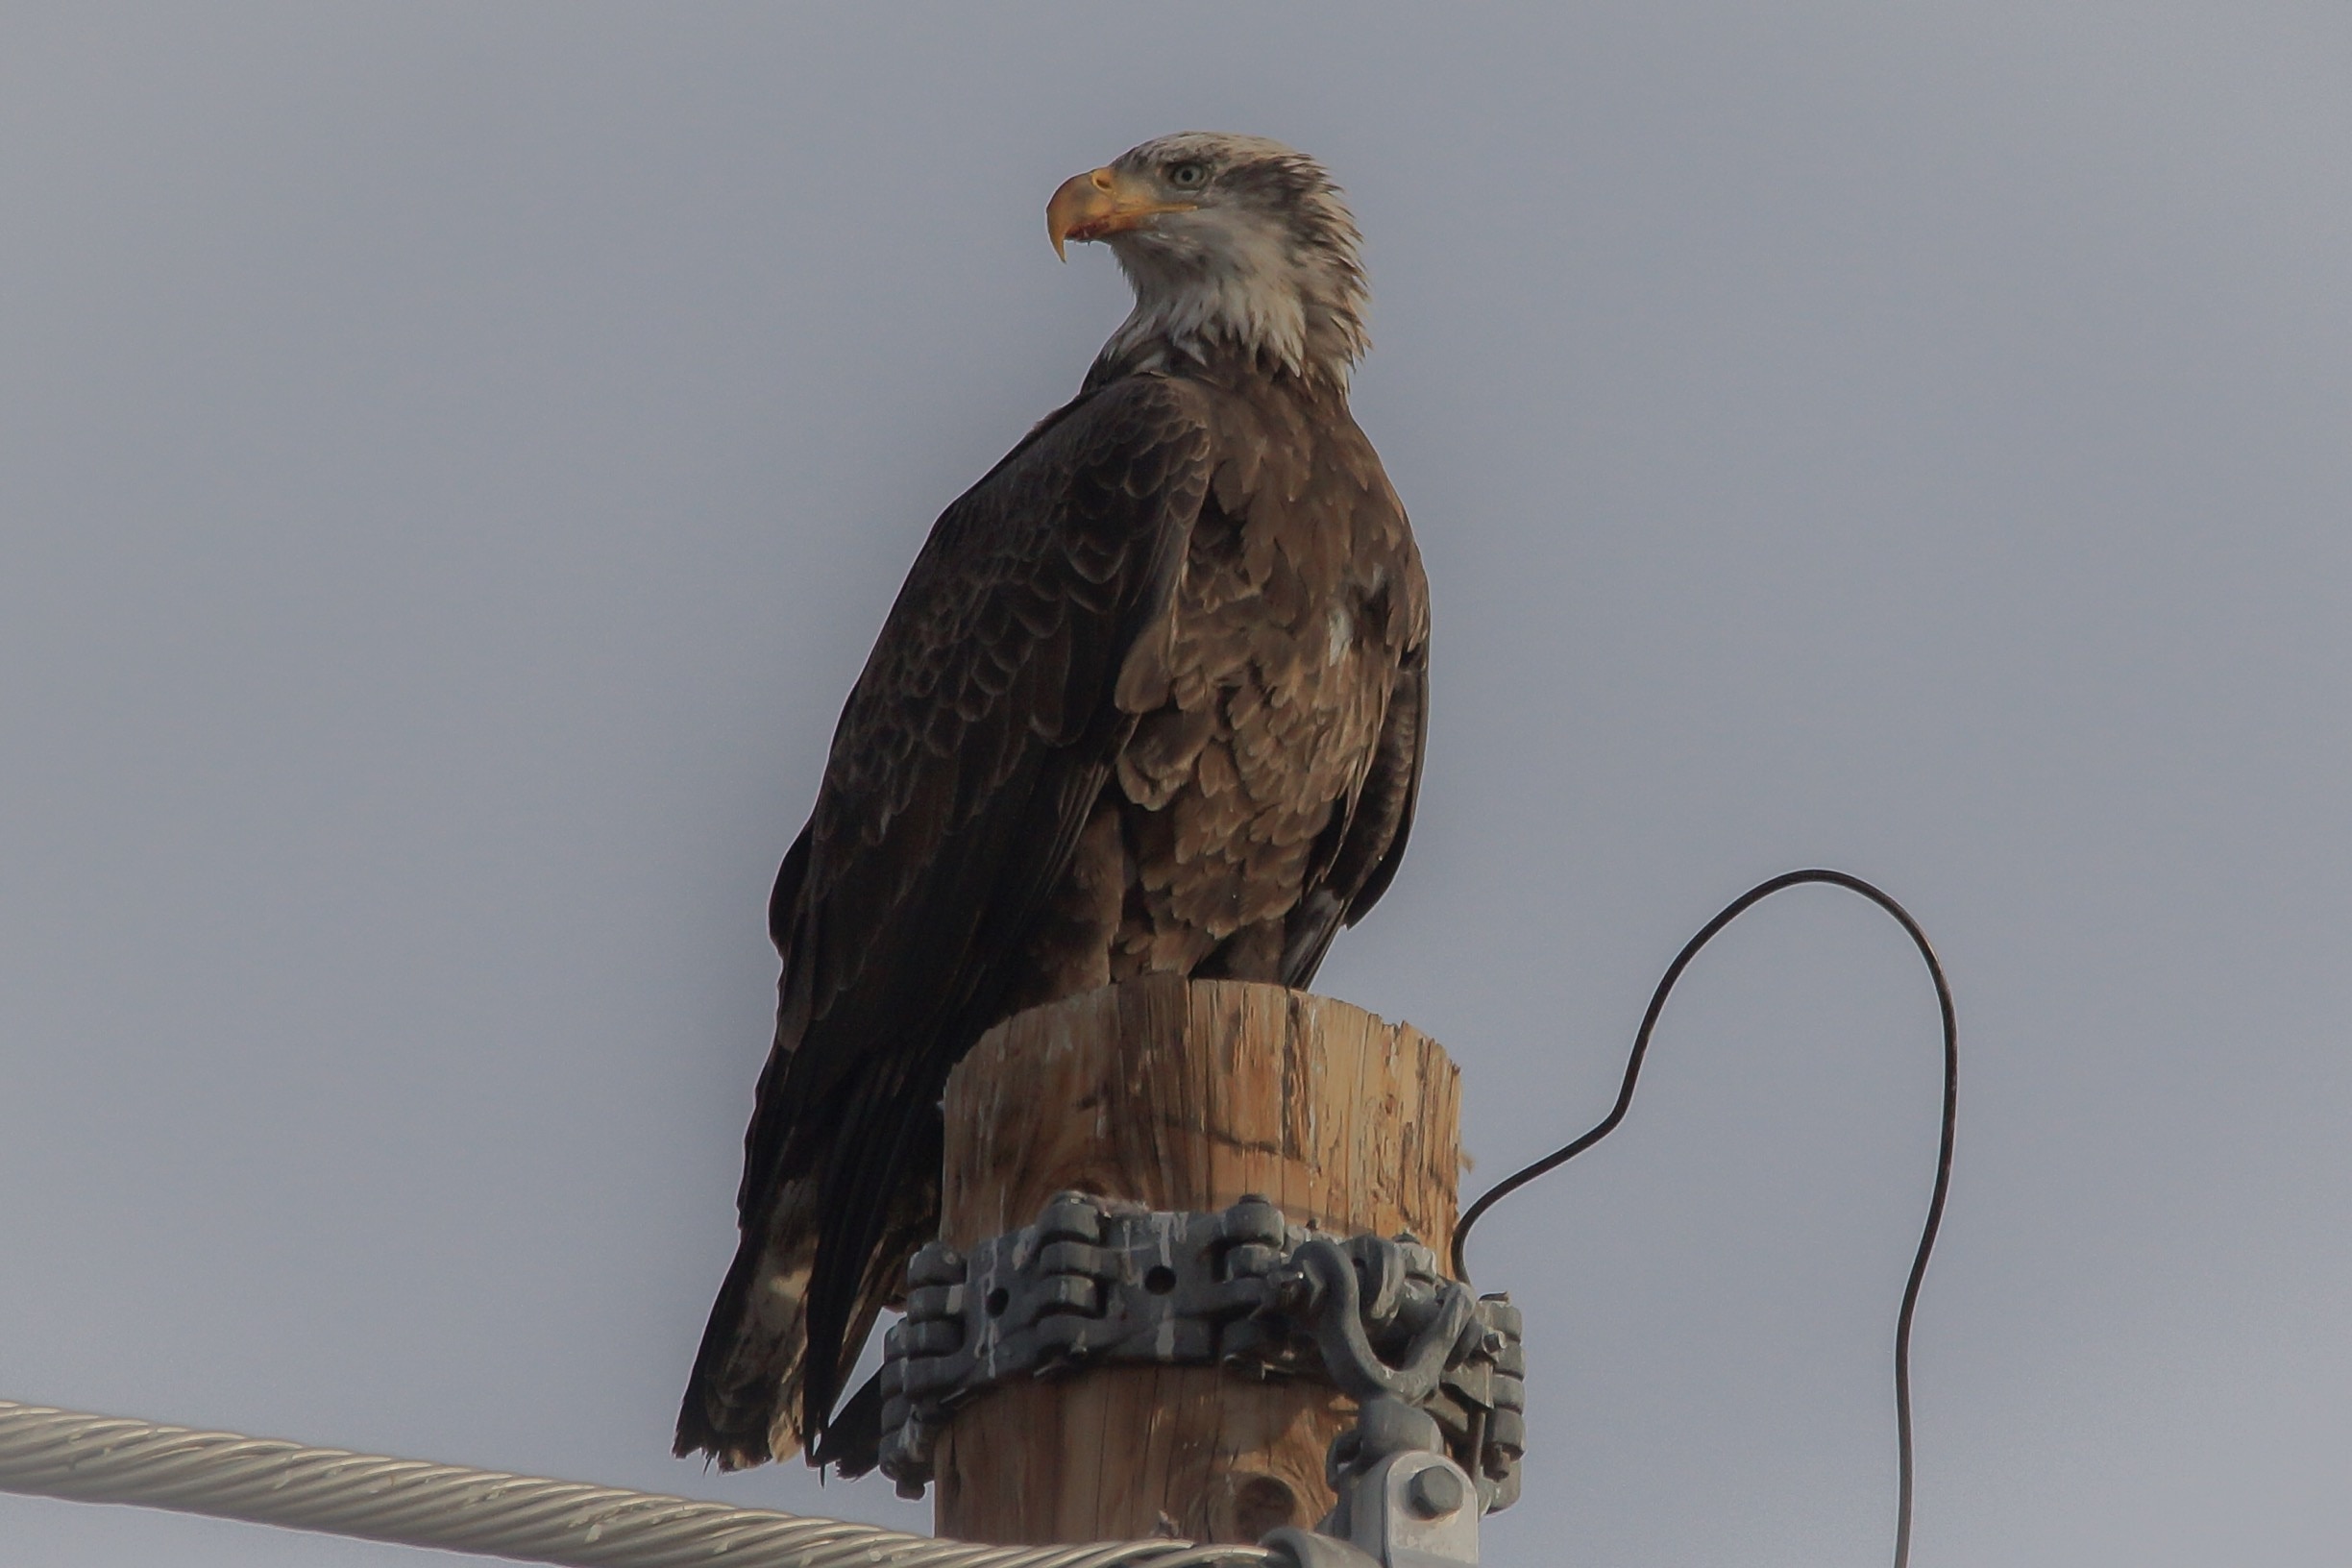 Bald eagle at Gilbert water ranch. This was my first bald eagle in the wild. What an amazing and beautiful bird #wildlife